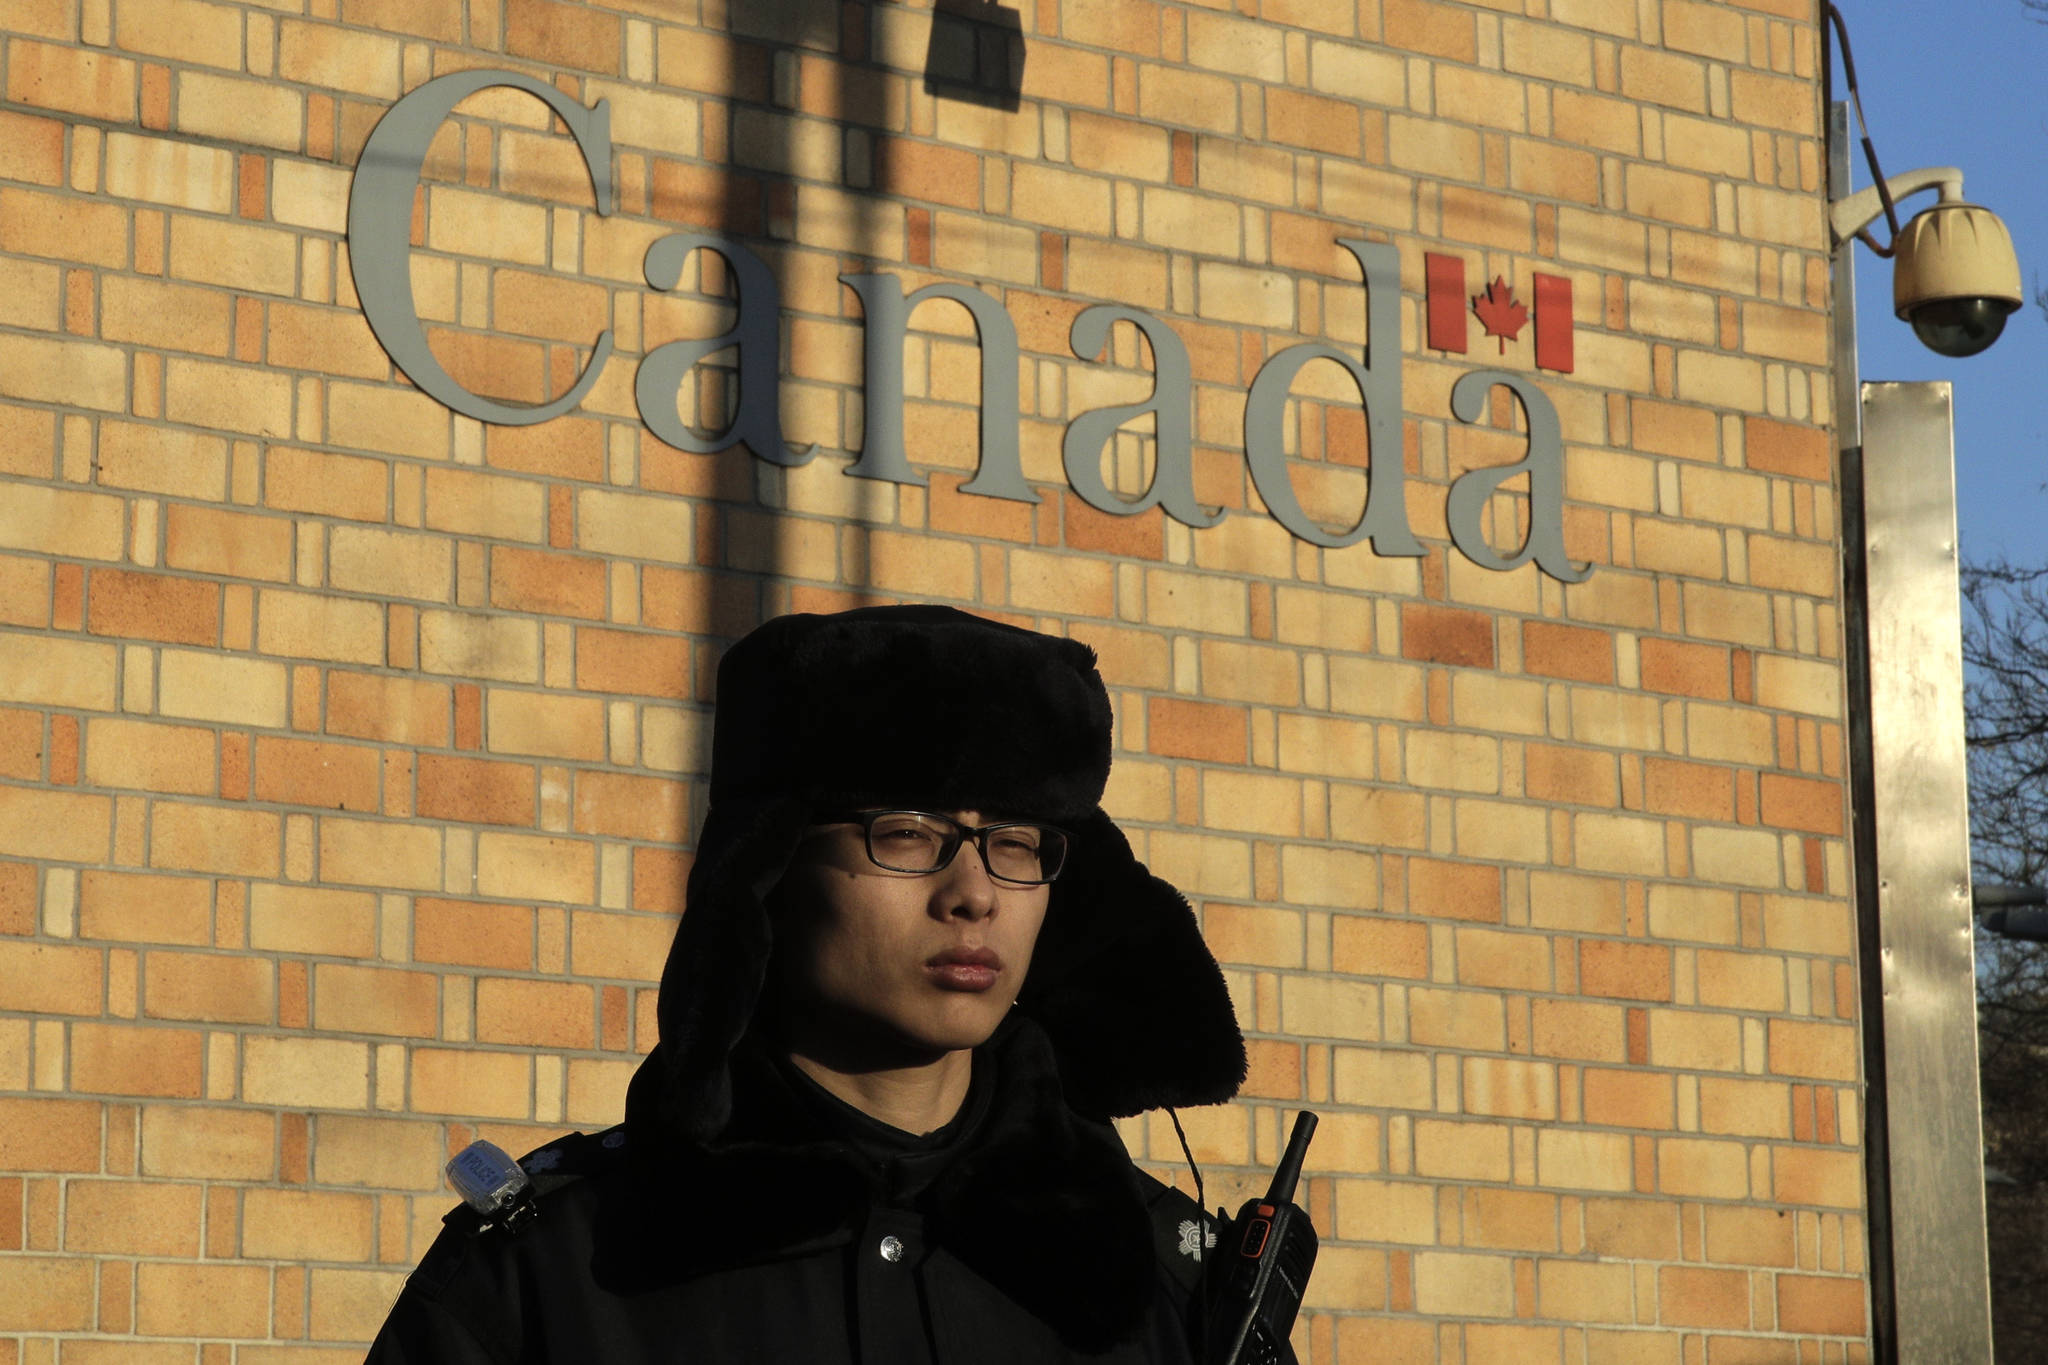 A policeman stands watch outside the Canadian Embassy in Beijing, Wednesday, Dec. 12, 2018. (AP Photo/Andy Wong)